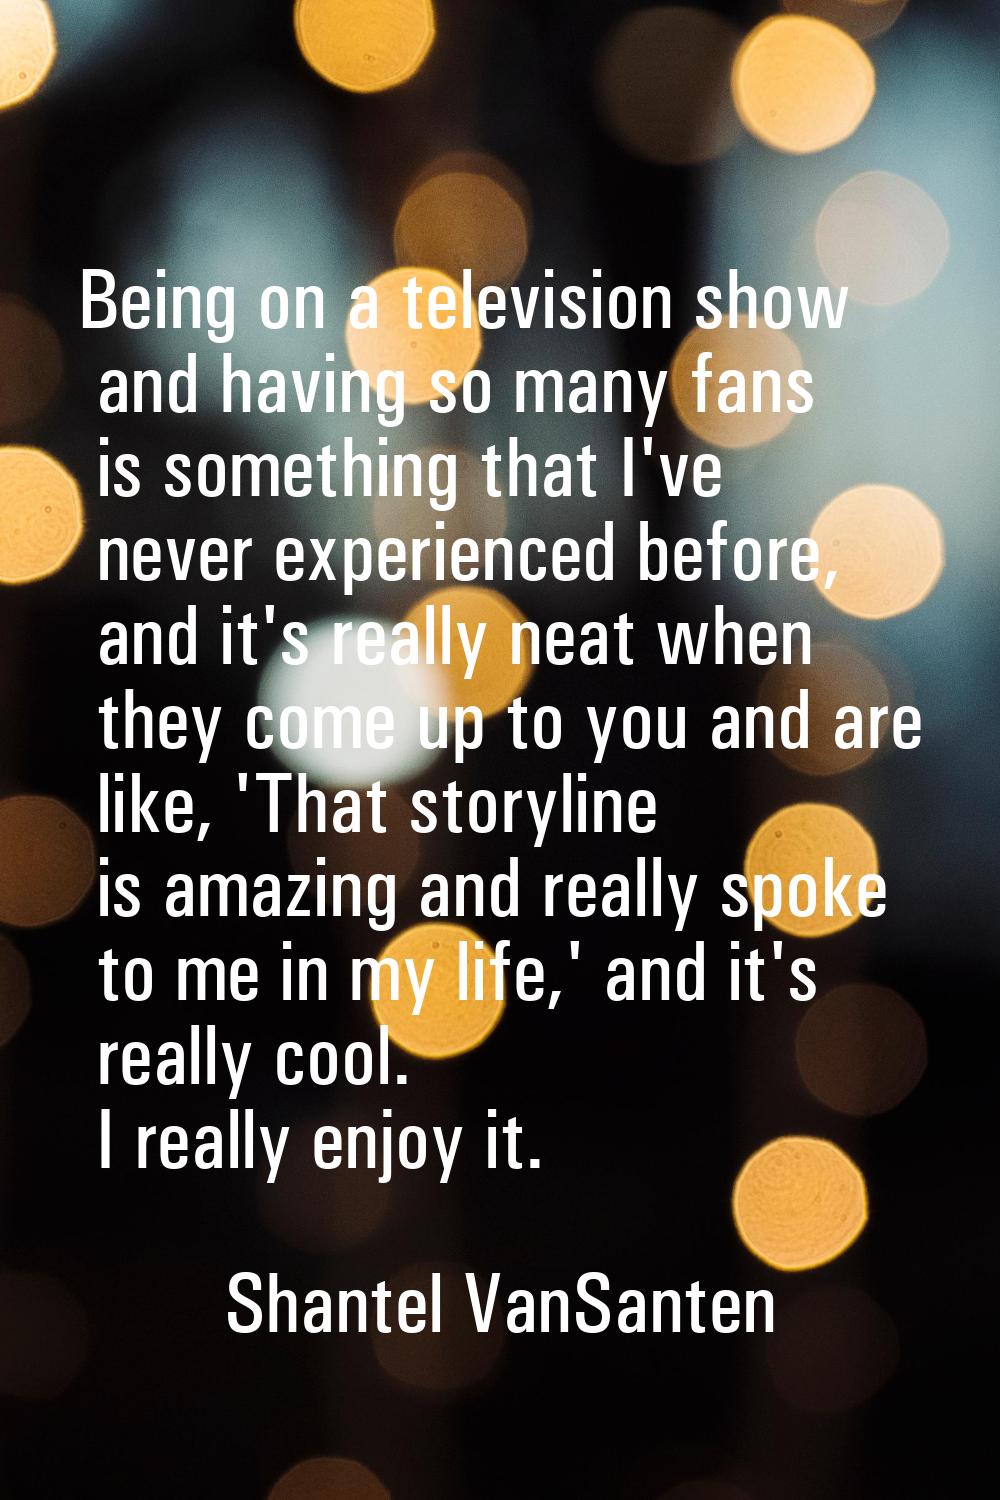 Being on a television show and having so many fans is something that I've never experienced before,